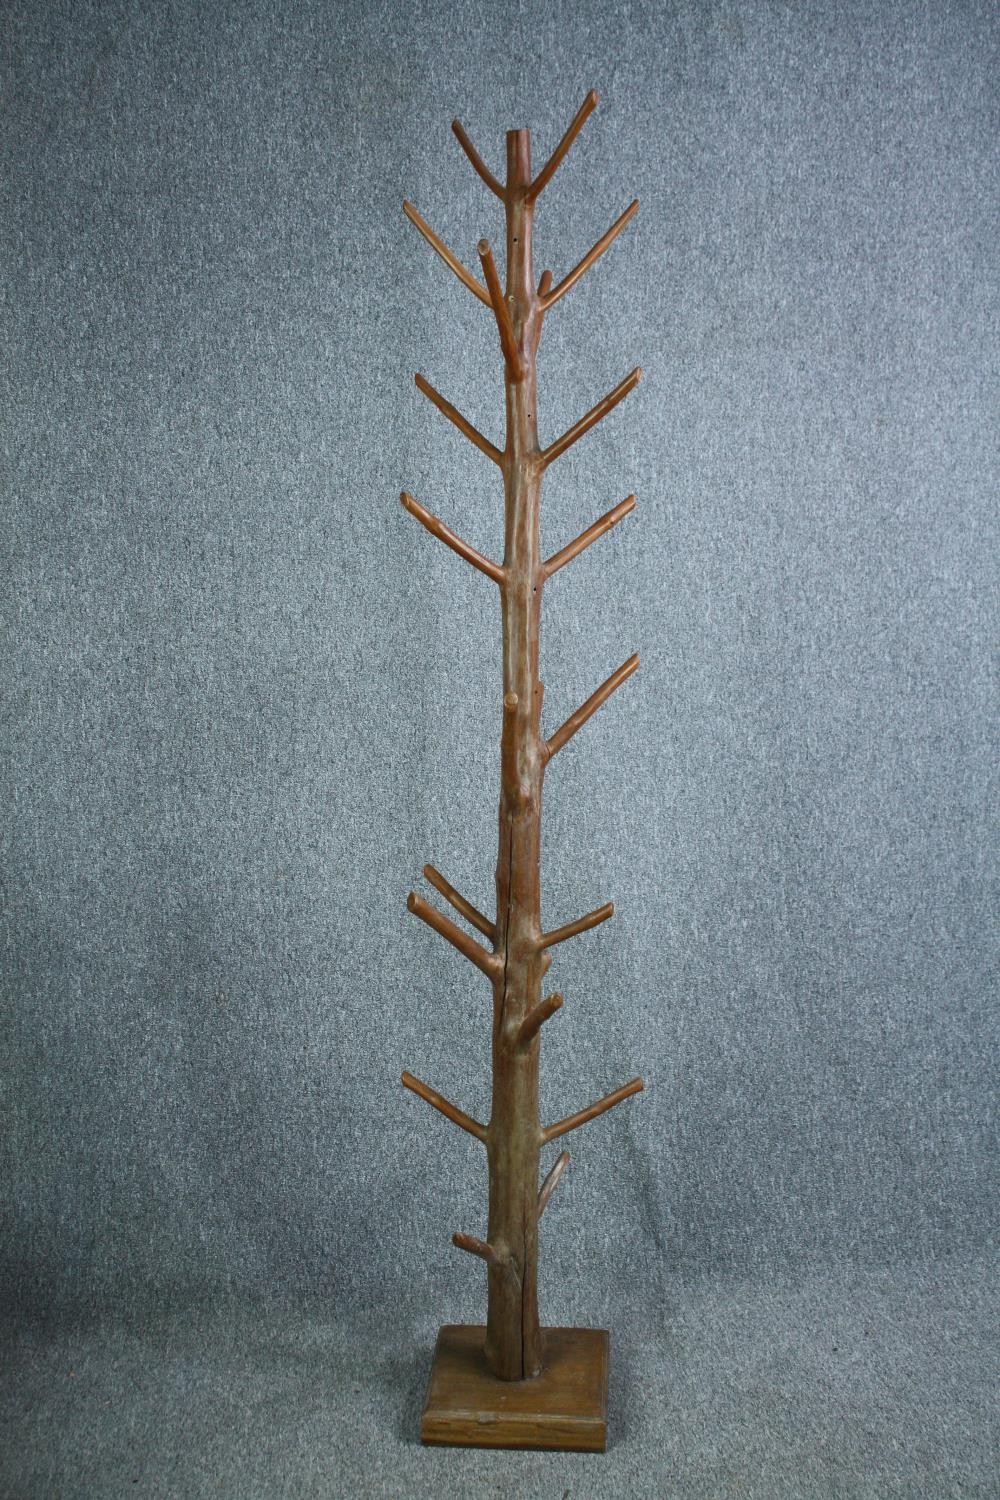 A hall coat and hatstand cut from a hardwood branch. Lacquered finish. H.205cm.